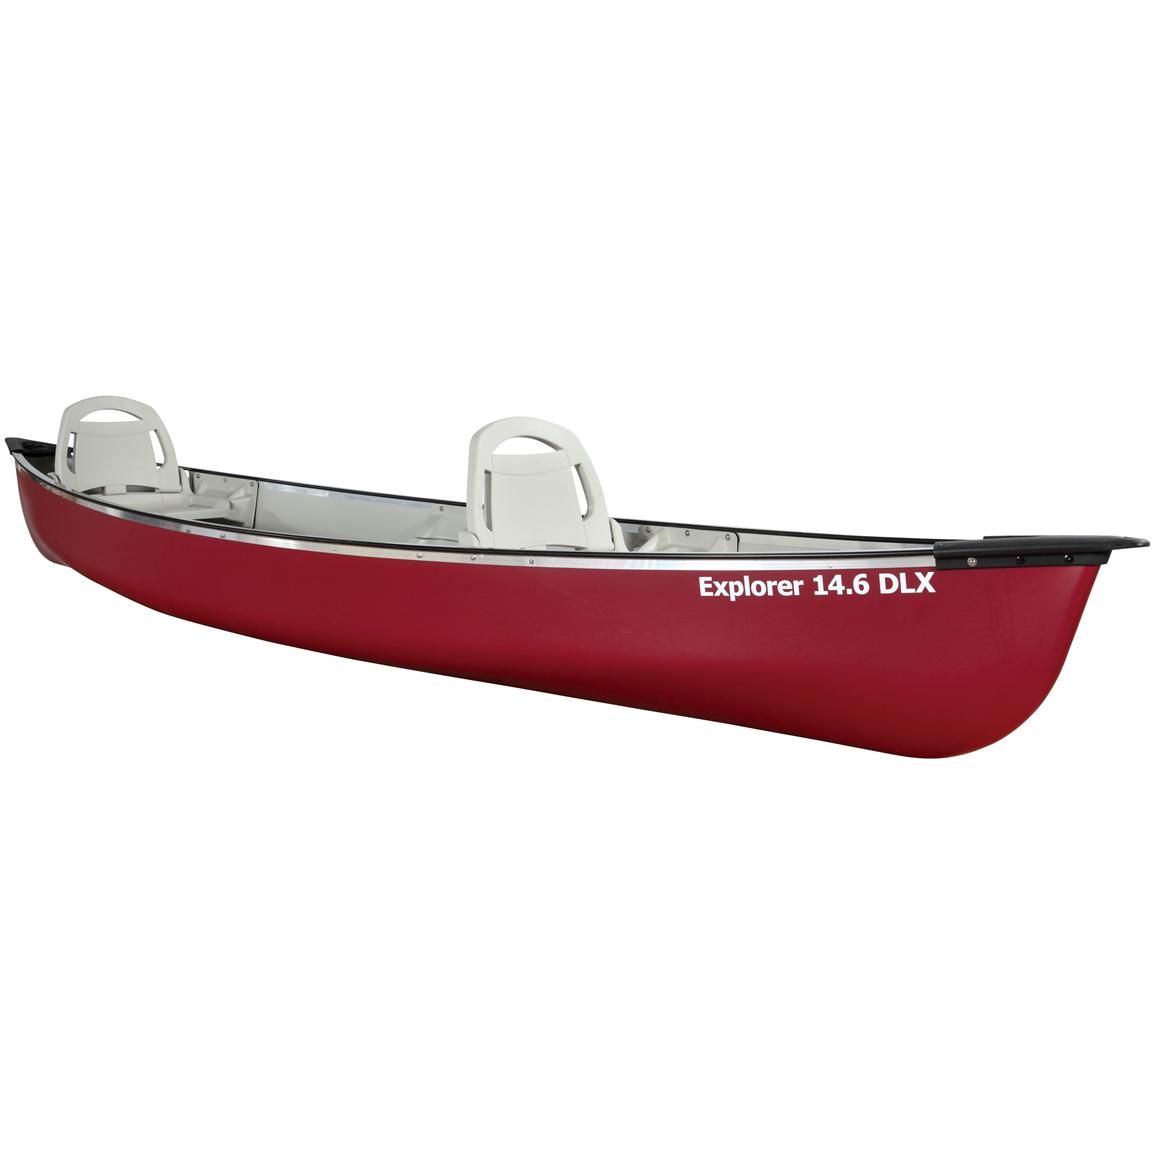 Pelican™ Explorer 14.6 DLX Canoe, Red - 206258, Canoes & Kayaks at Sportsman's Guide1154 x 1154